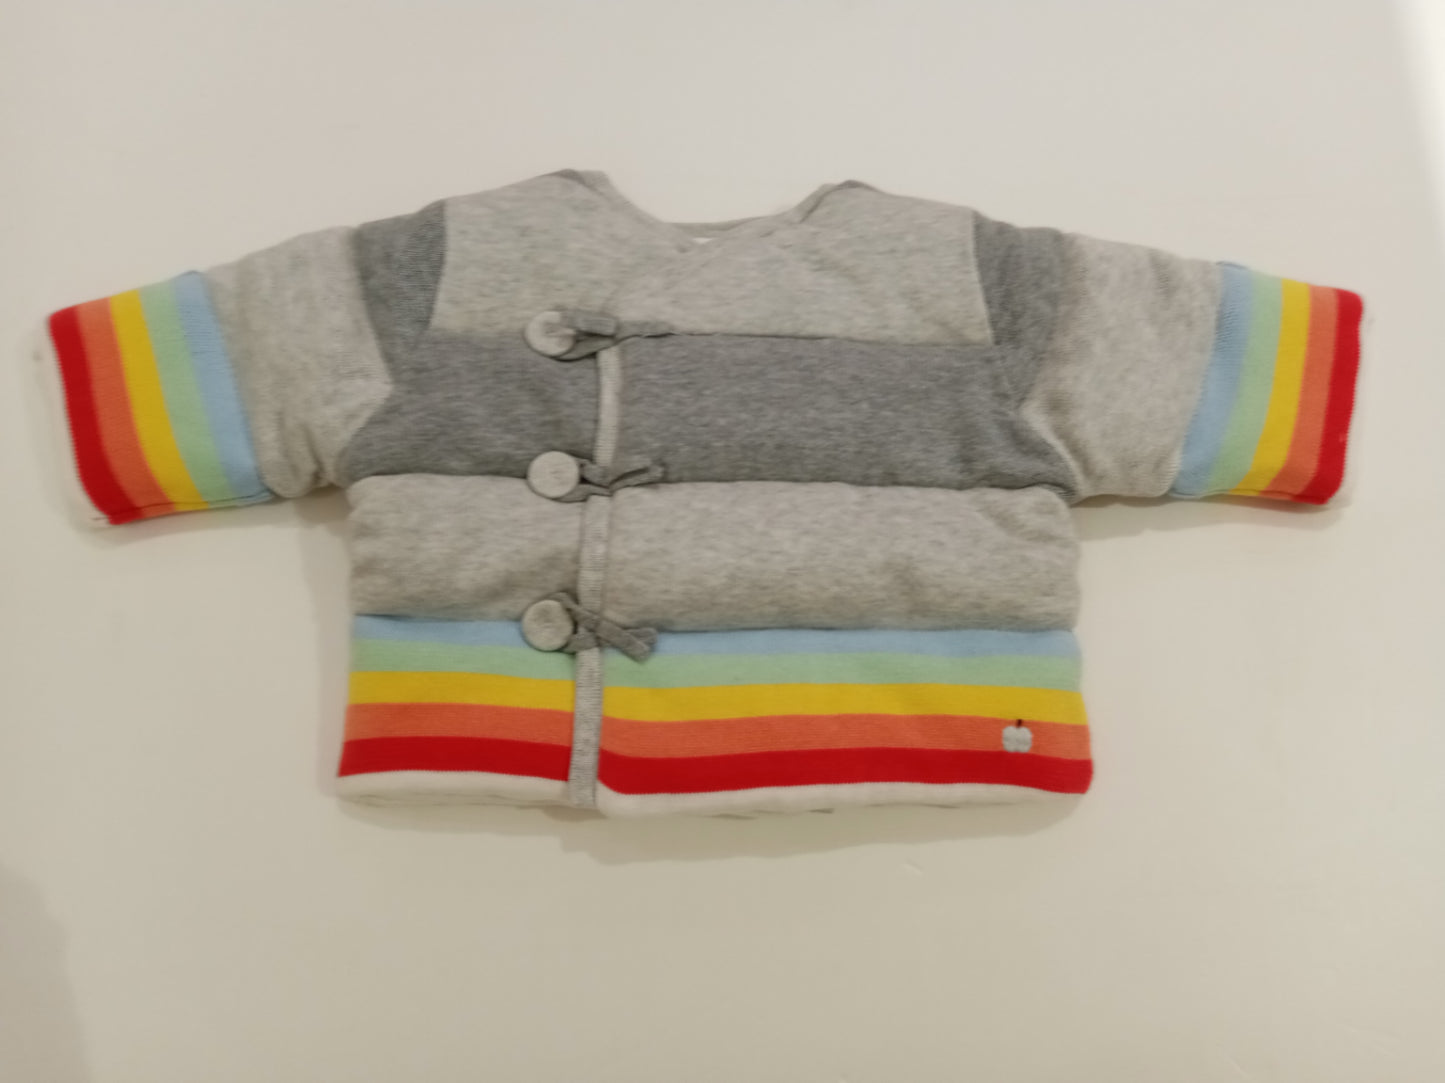 JACKET - BABY -  3 COLOR (PINK/GREY/BLUE) - BBA15 003